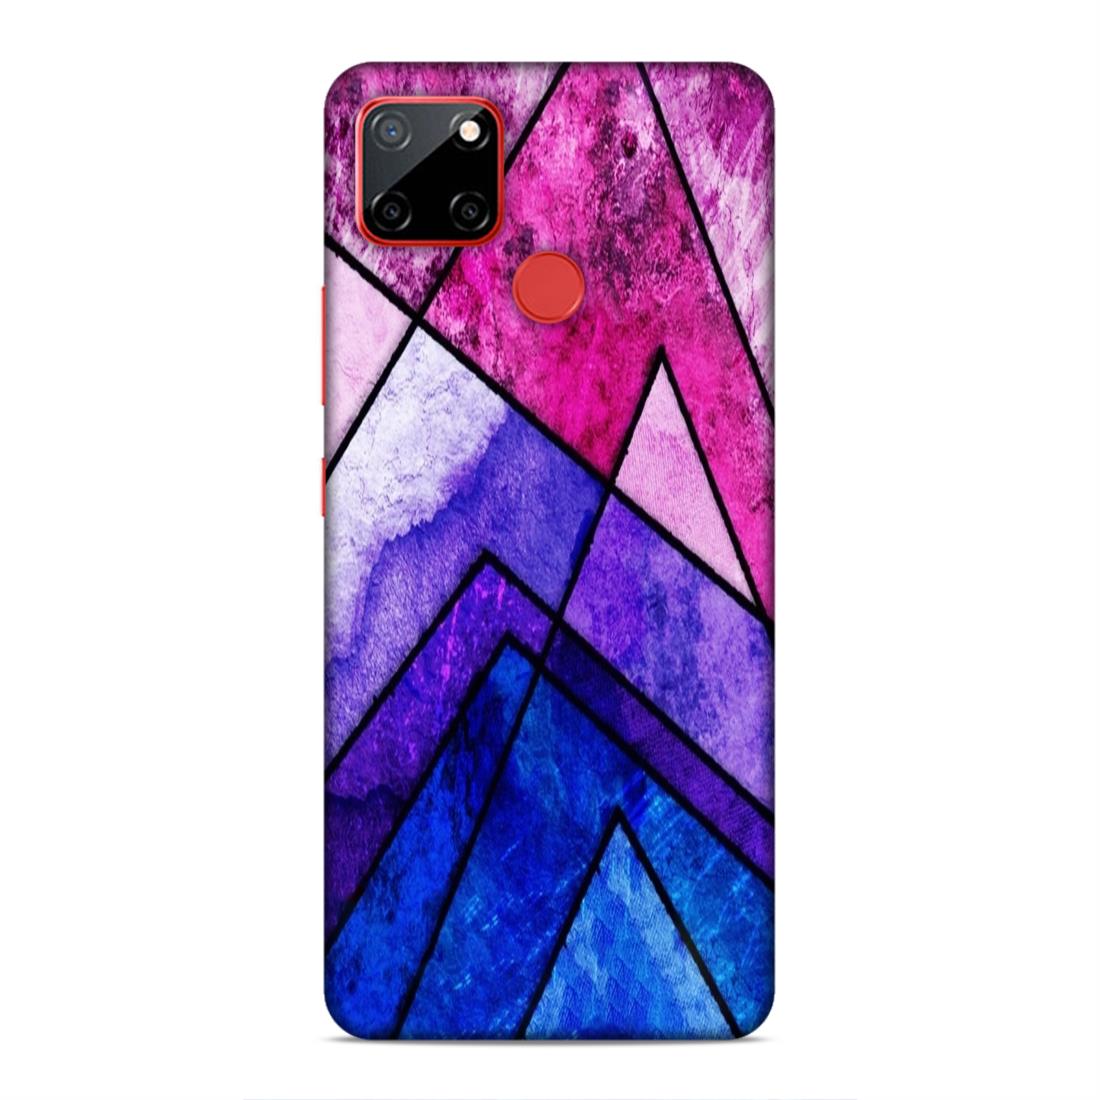 Blue Pink Pattern Hard Back Case For Realme C12 / C25 / C25s / Narzo 20 / 30A